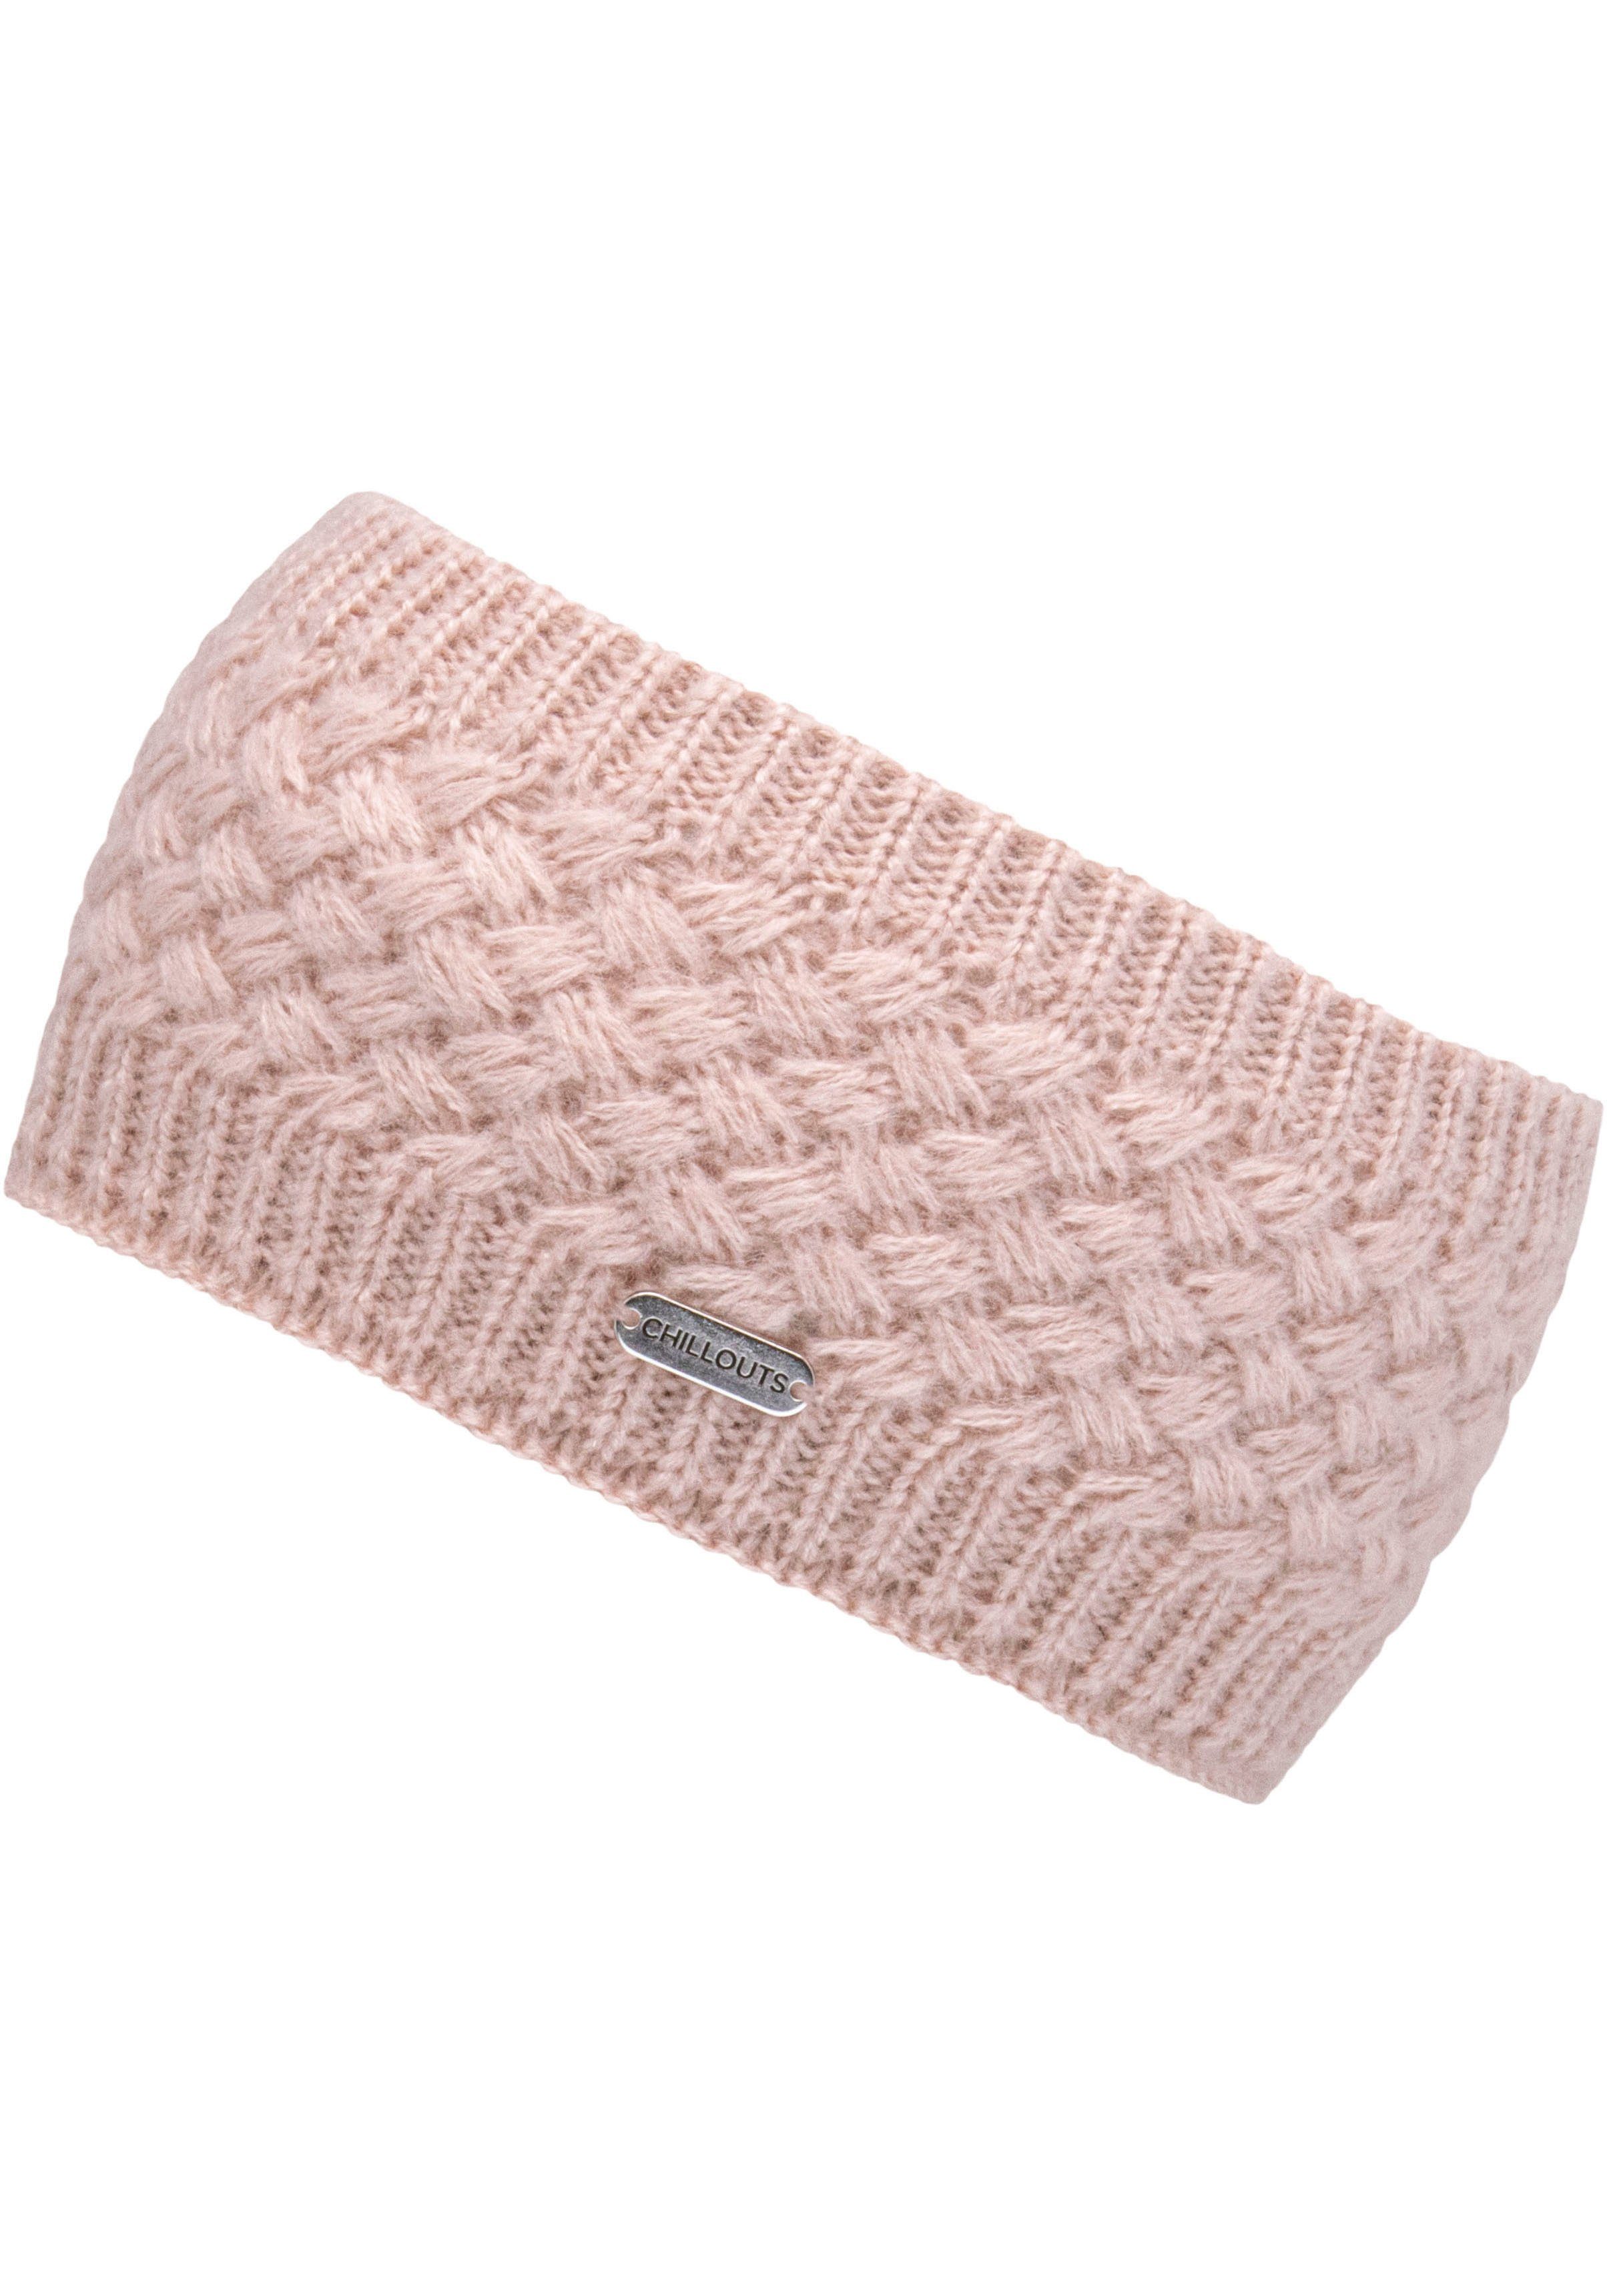 chillouts Stirnband Felicitas Headband Metall-Label rose